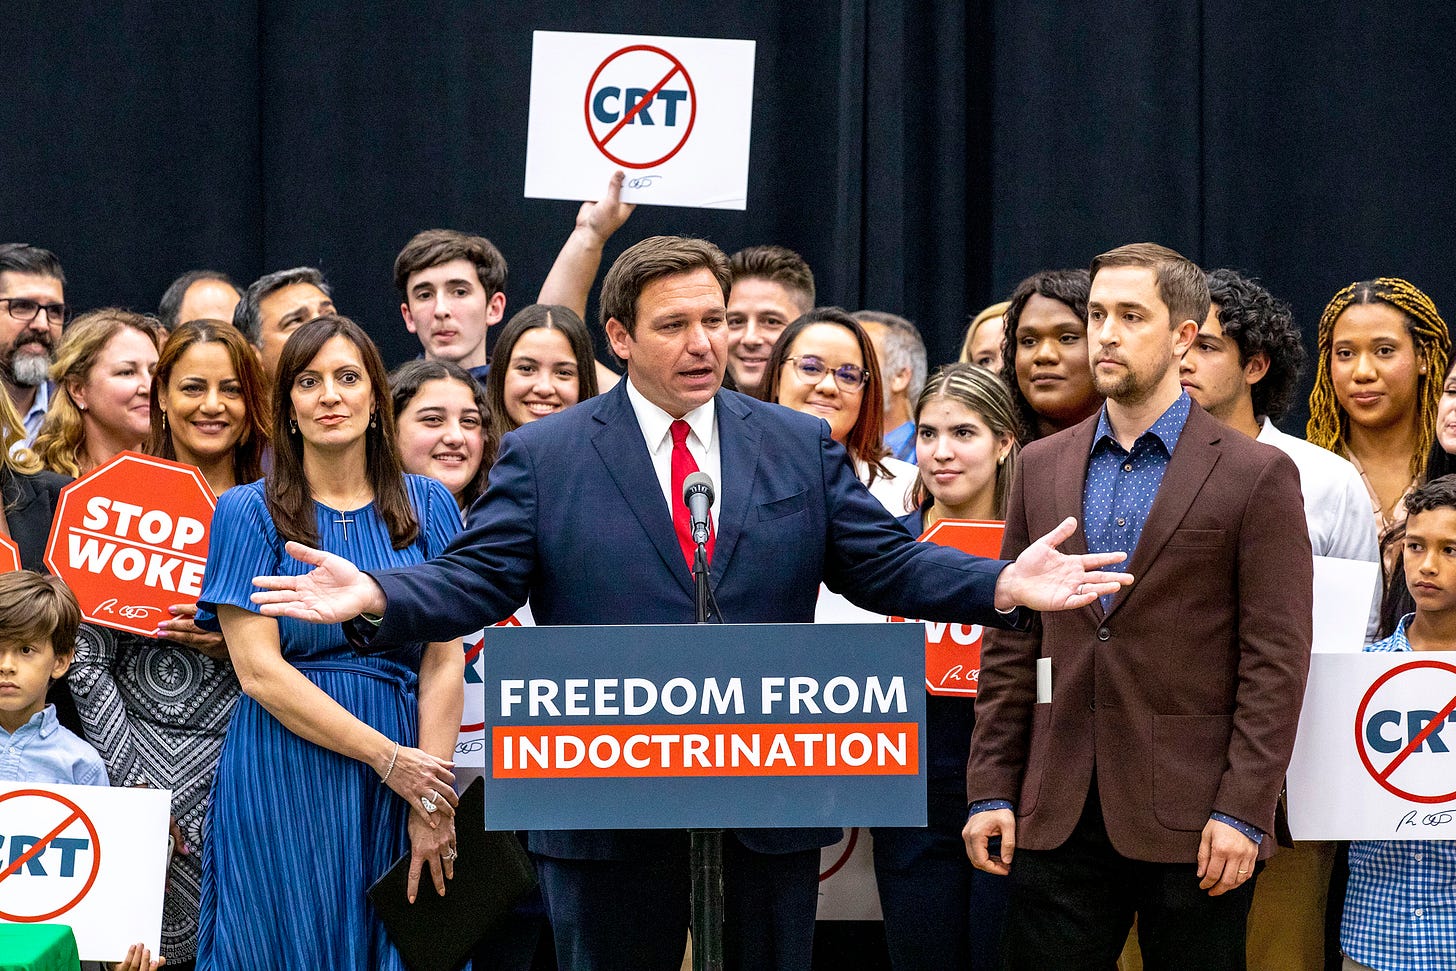 Florida Gov. Ron DeSantis wants schools to avoid indoctrination. But that's  what education is.